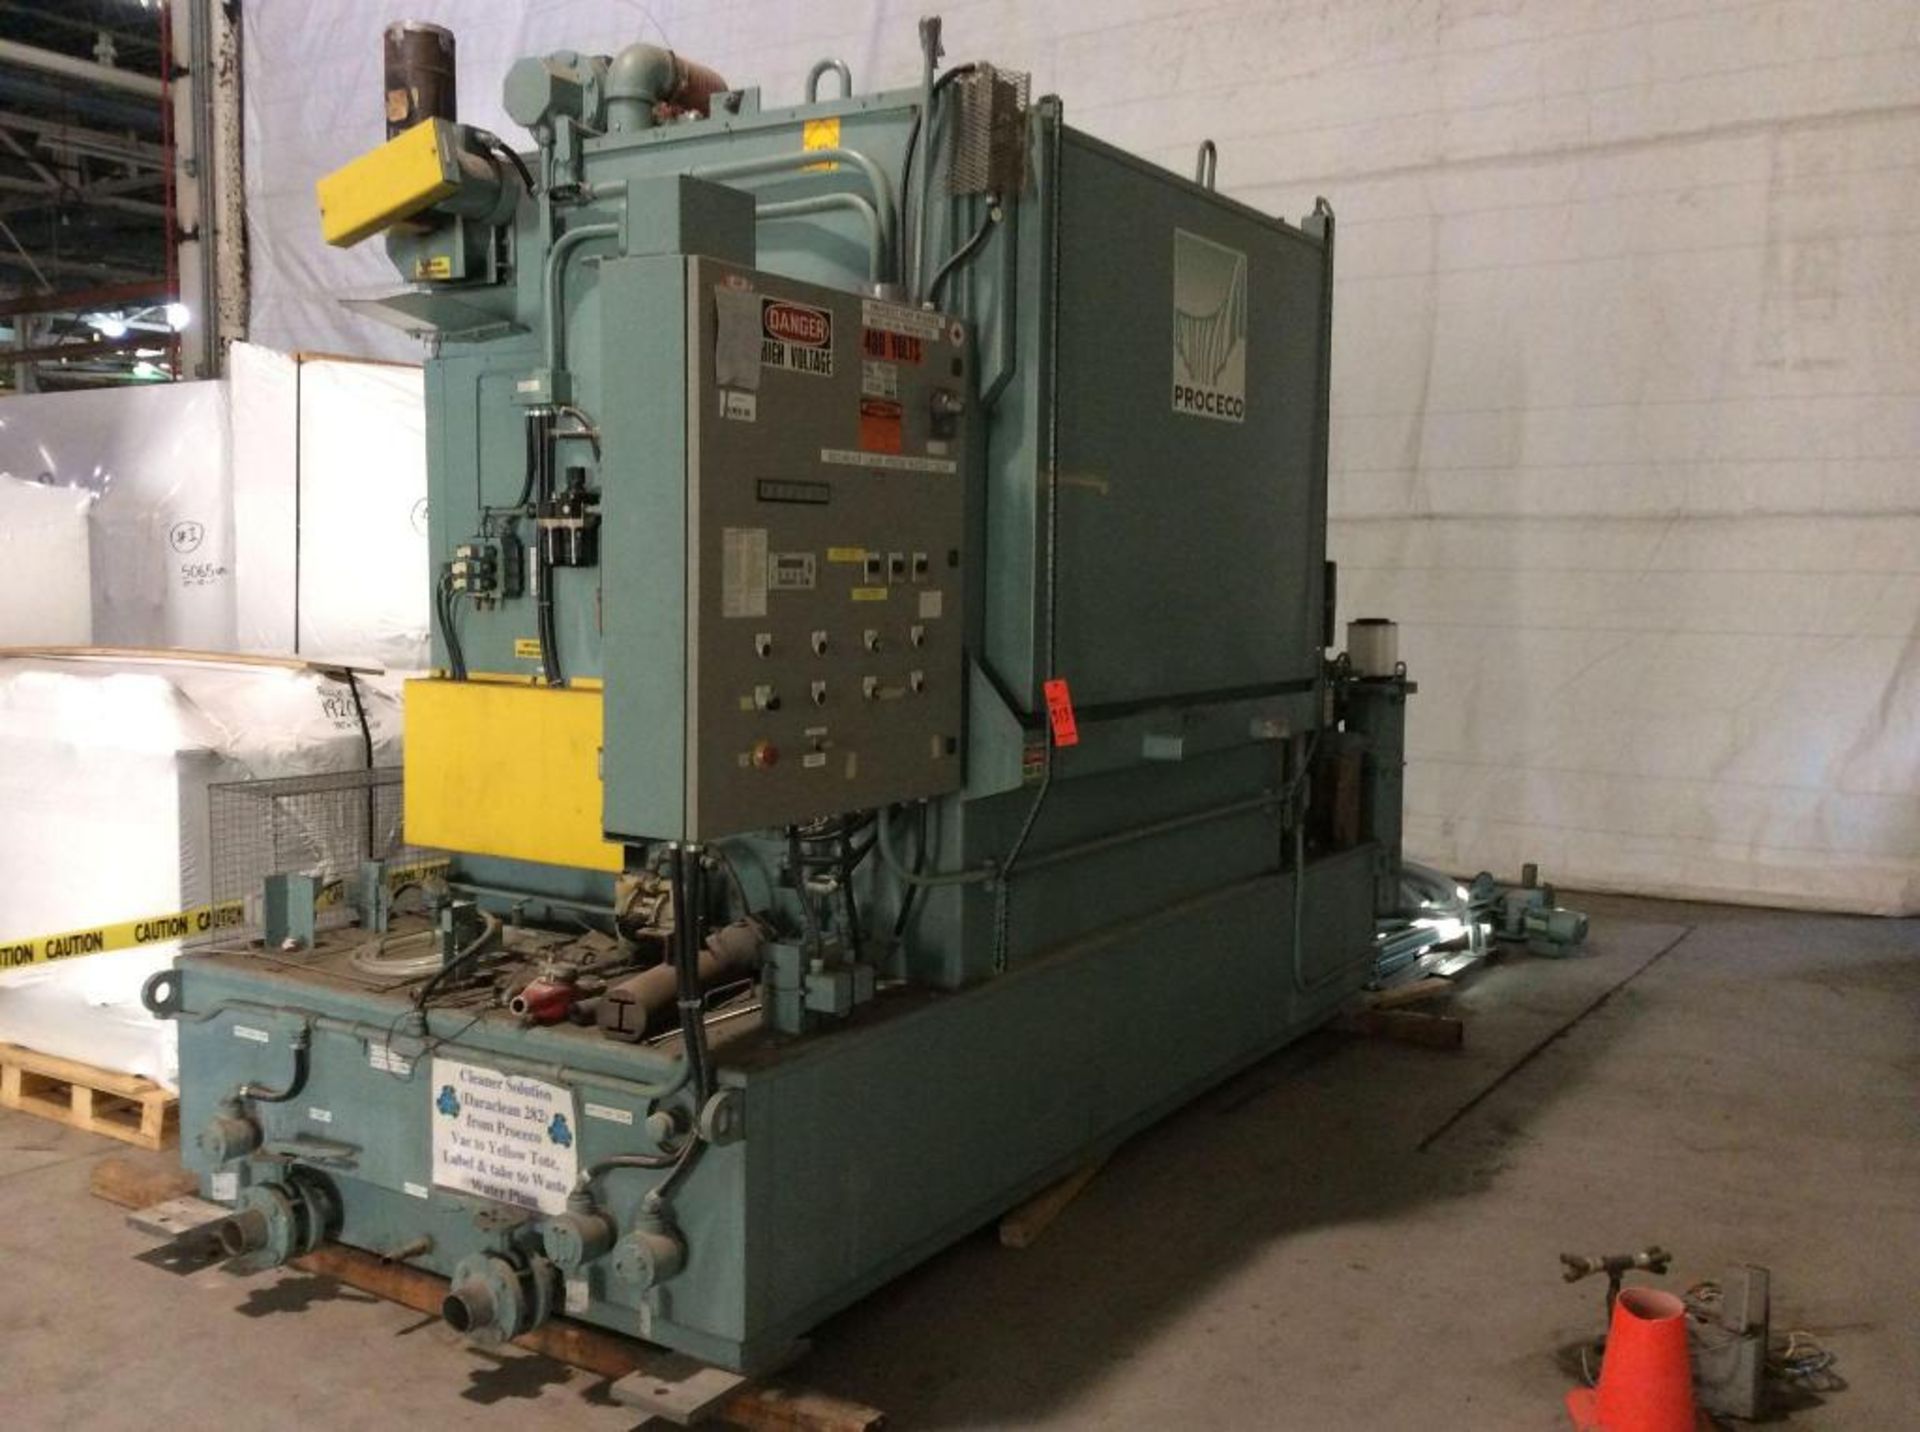 Proceco 48" rotary, 2-stage parts washer, mn FTT-50-48-E-2500-2-2RD-HBO-SS301, sn 96248, Siemens